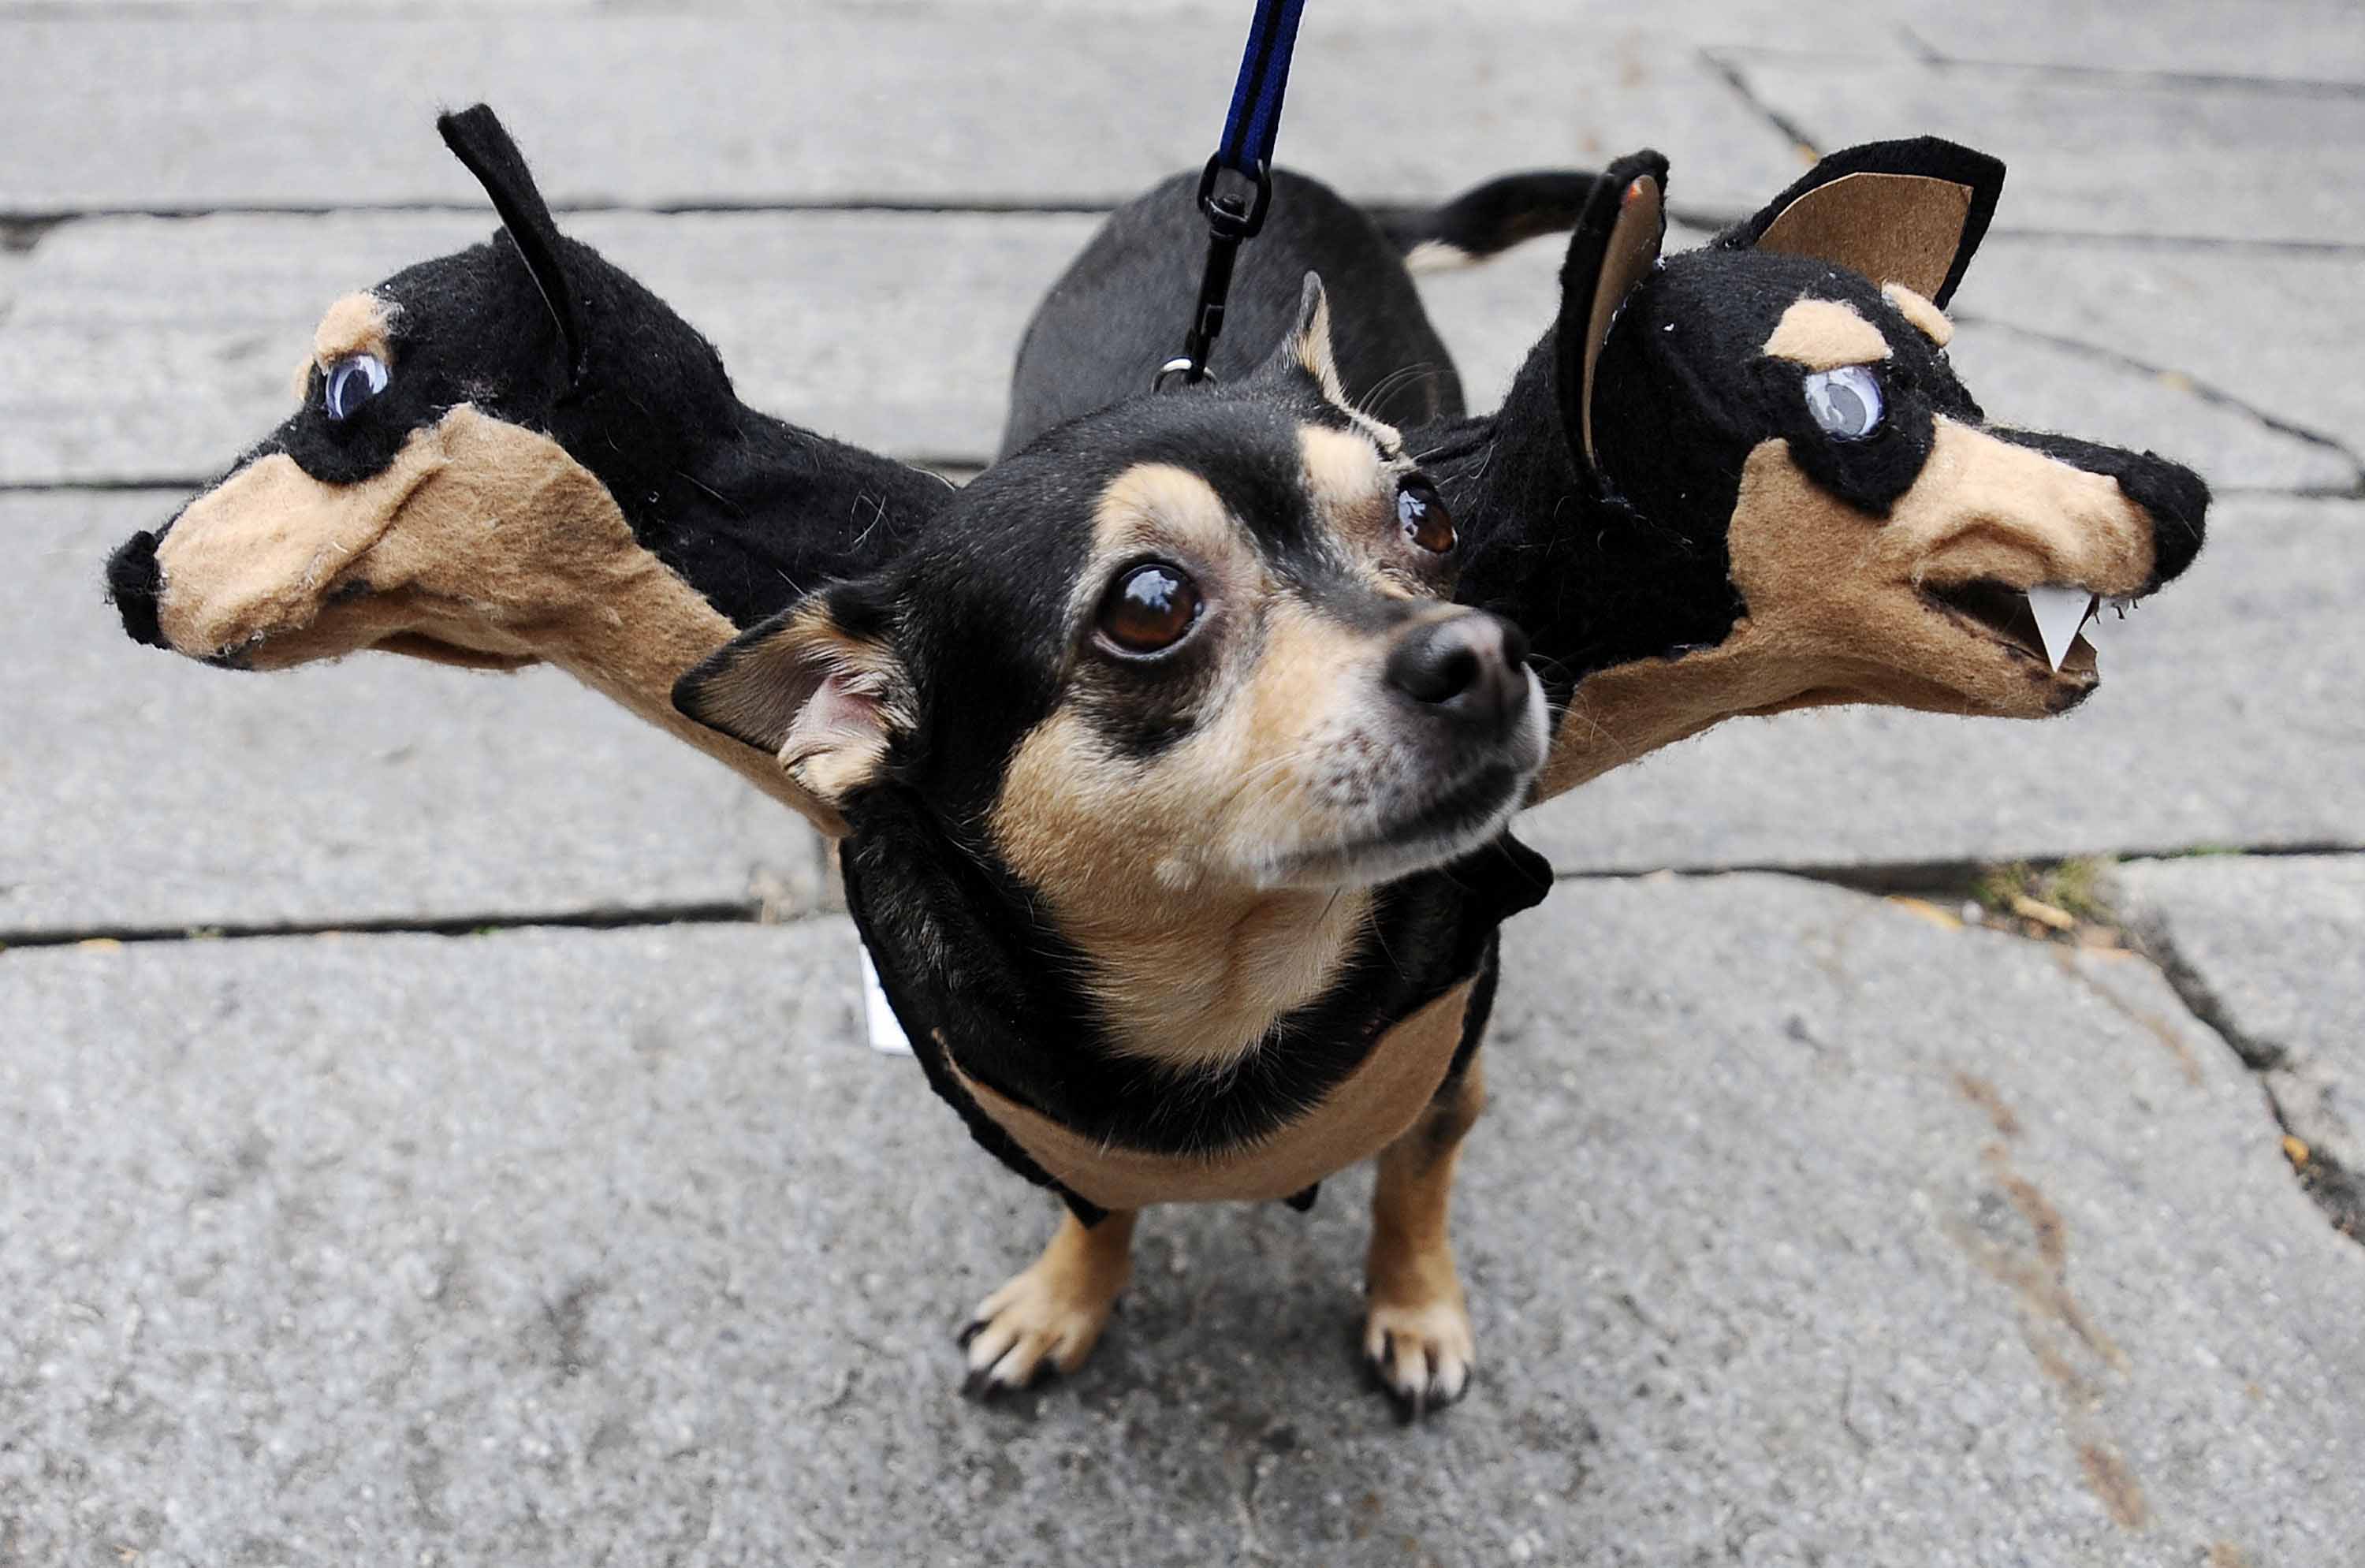 "howl-oween," a dog costume contest